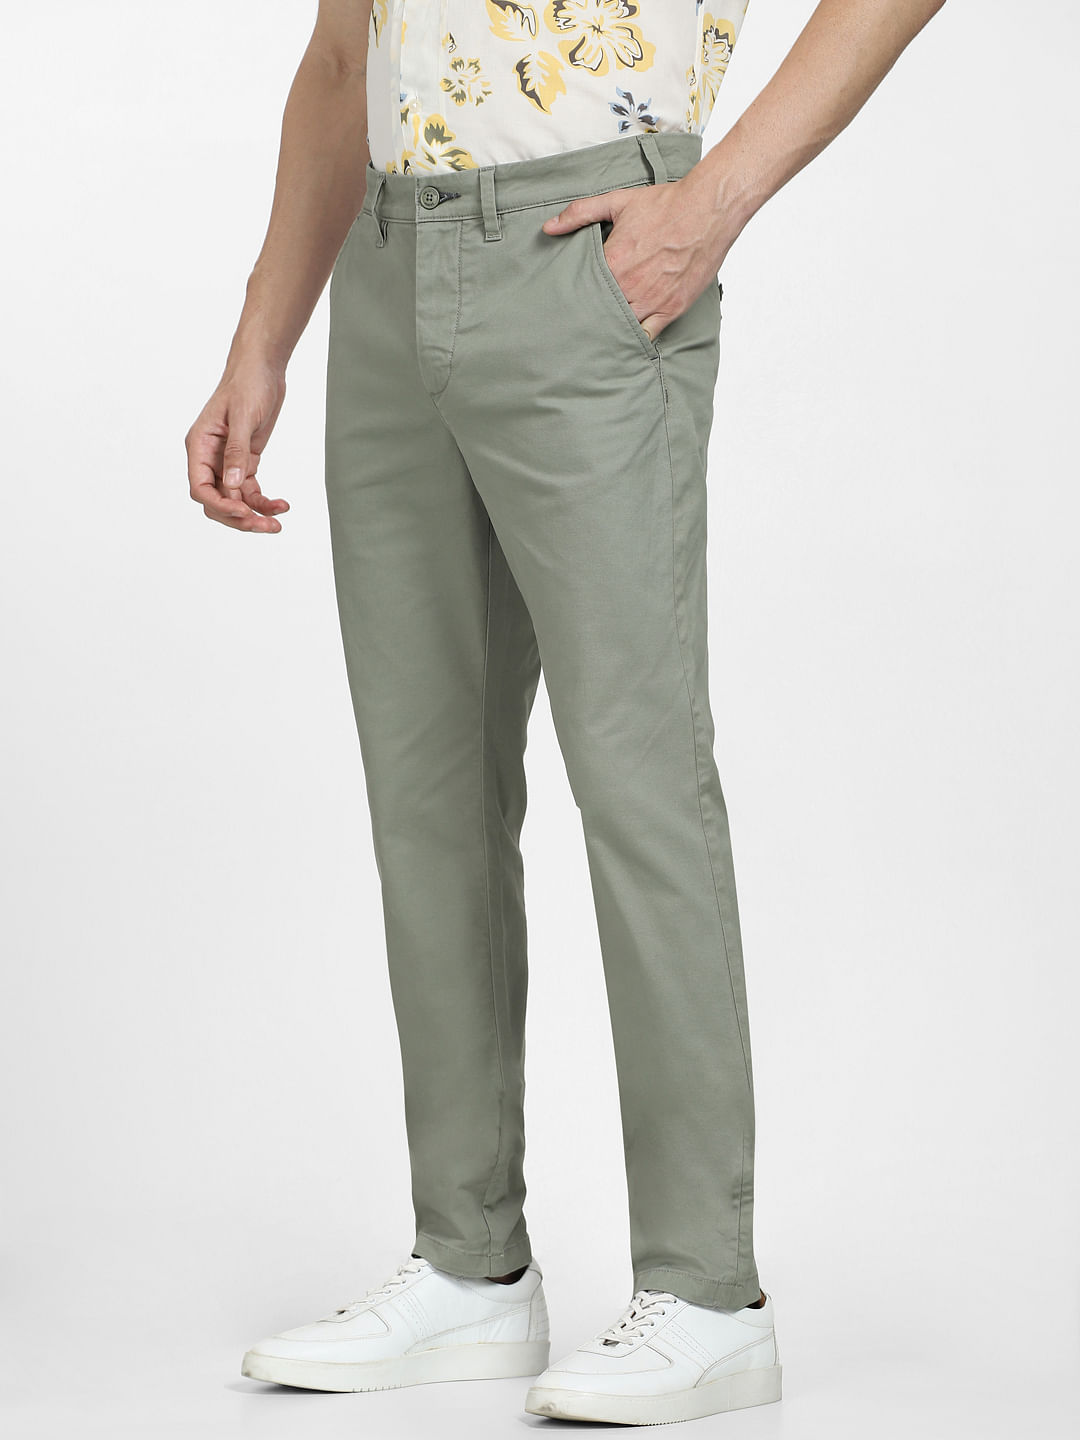 Alex Mill Pants | Straight Leg Pant in Vintage Washed Chino (Long Inseam)  Faded Khaki - Mens - Ann Christenson